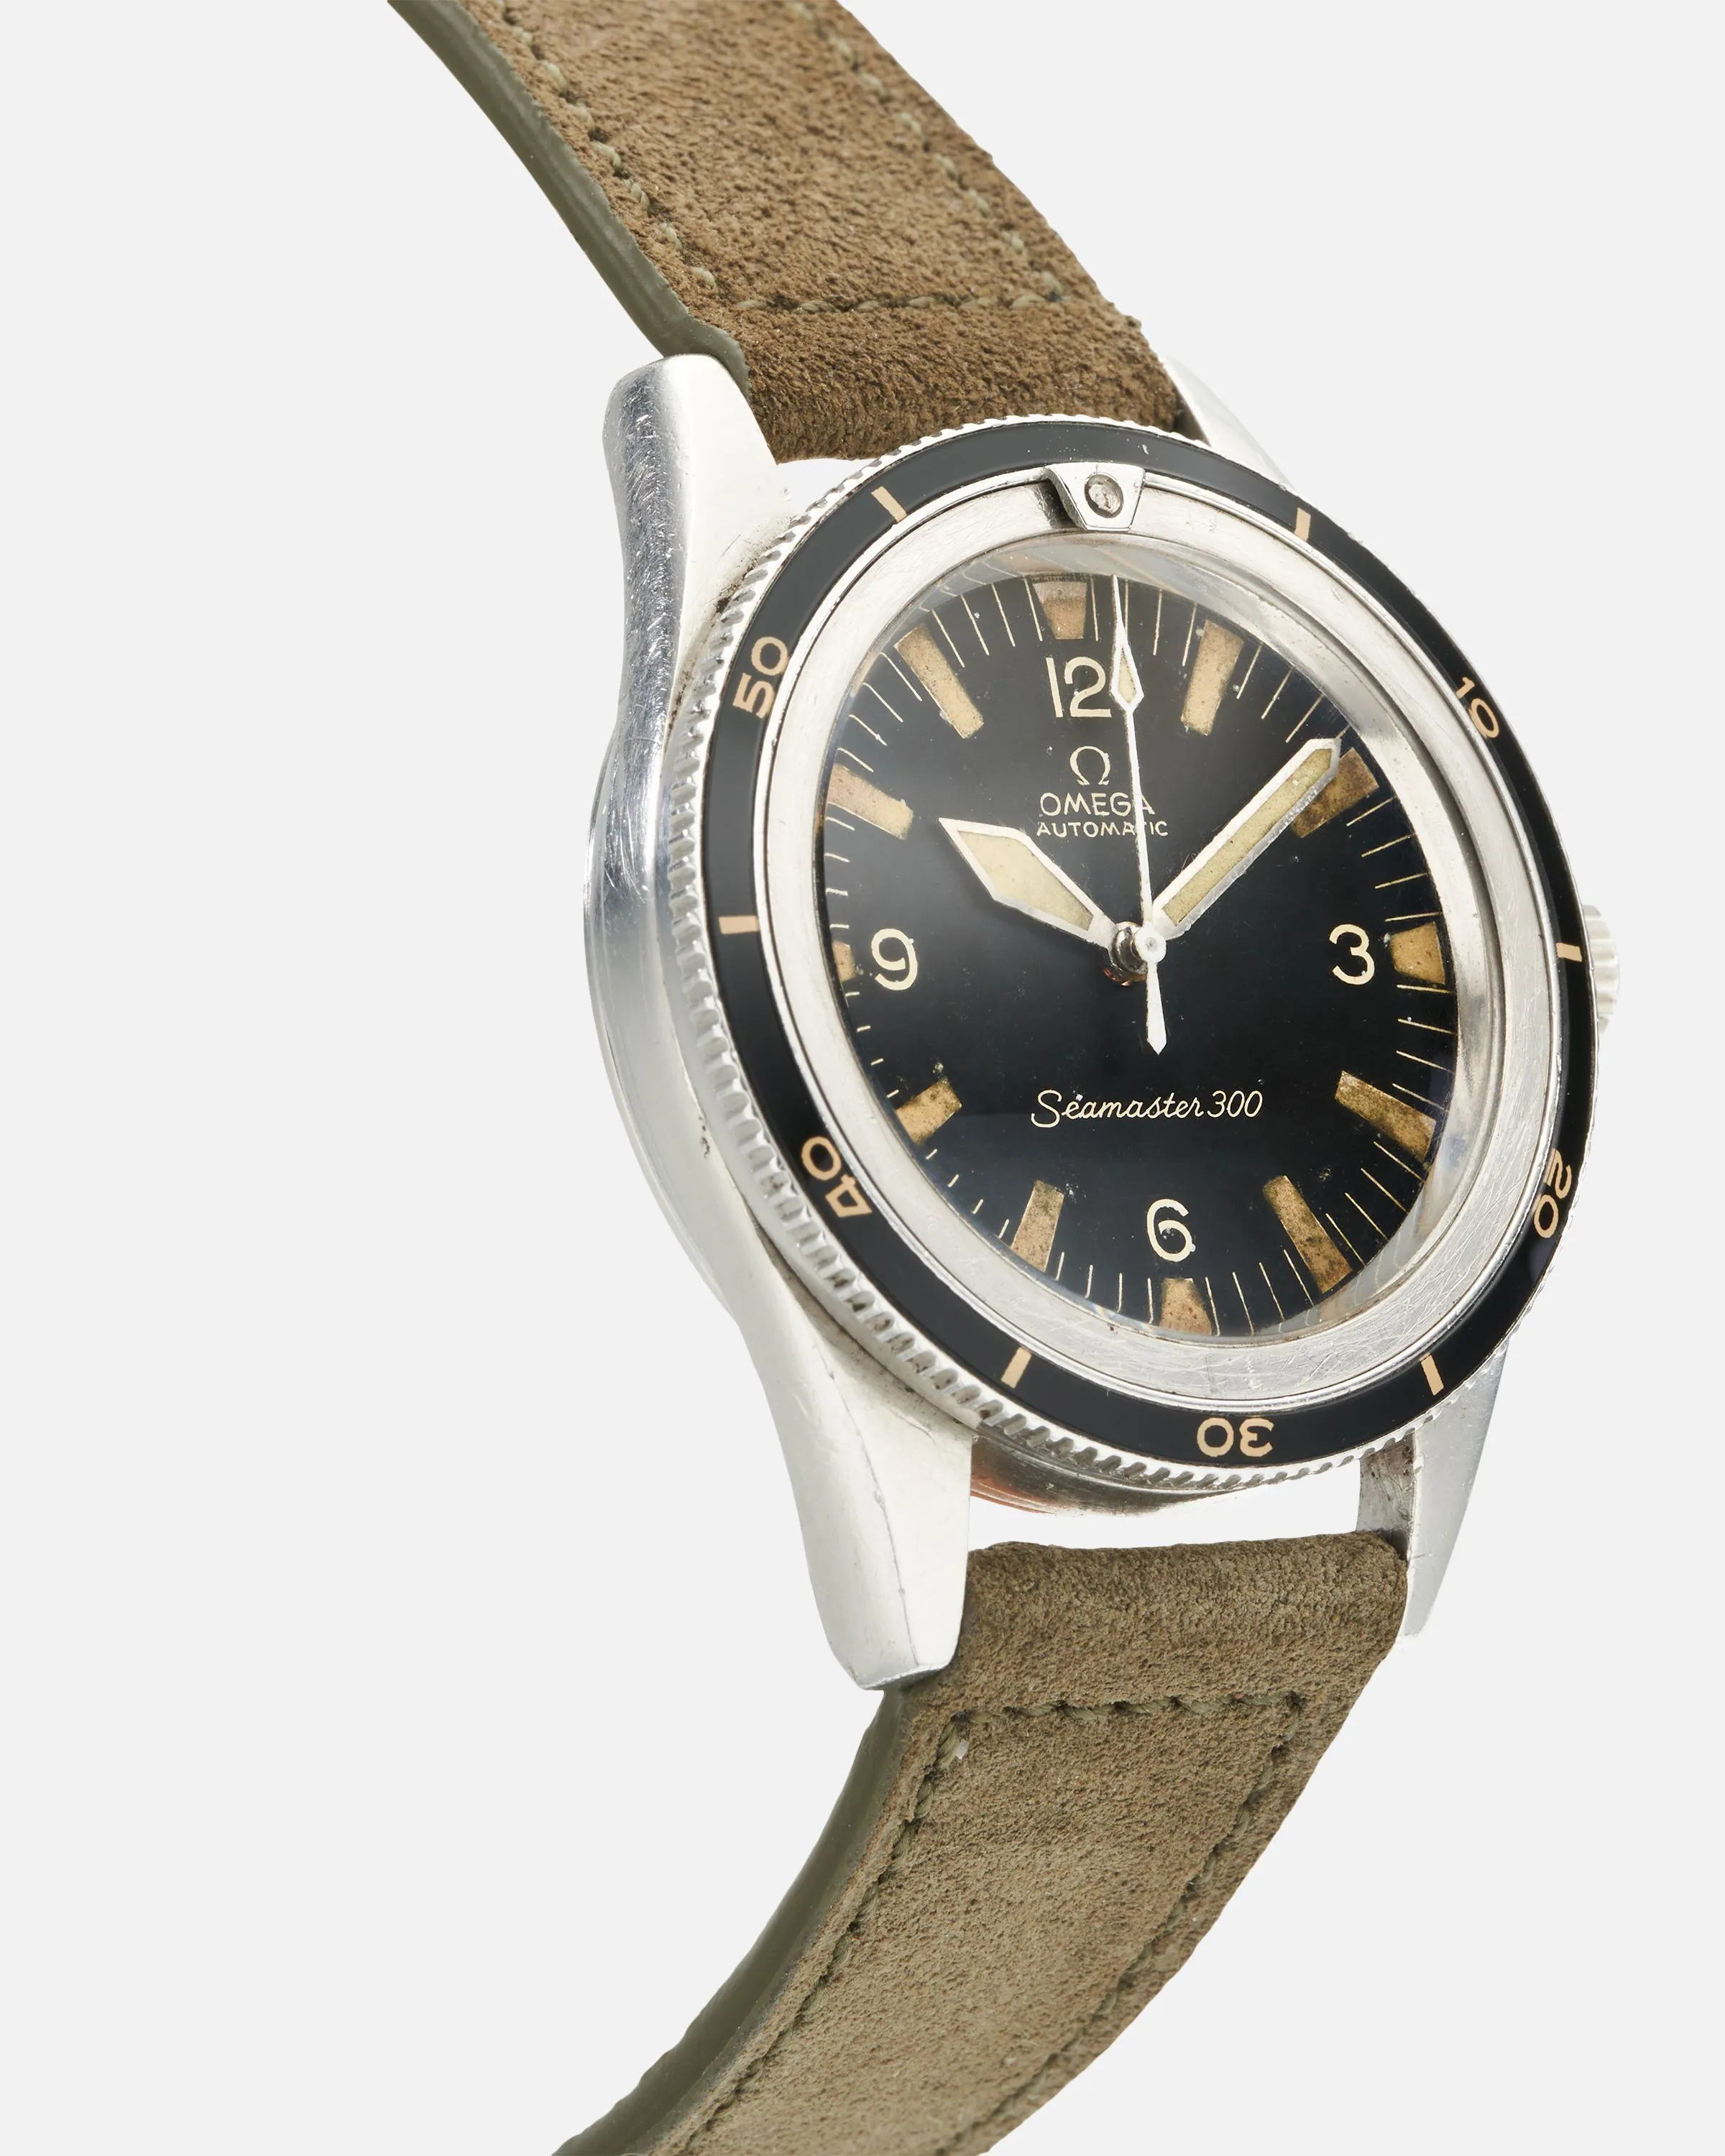 Omega Seamaster 300 165.014 39mm Stainless steel Patina 5